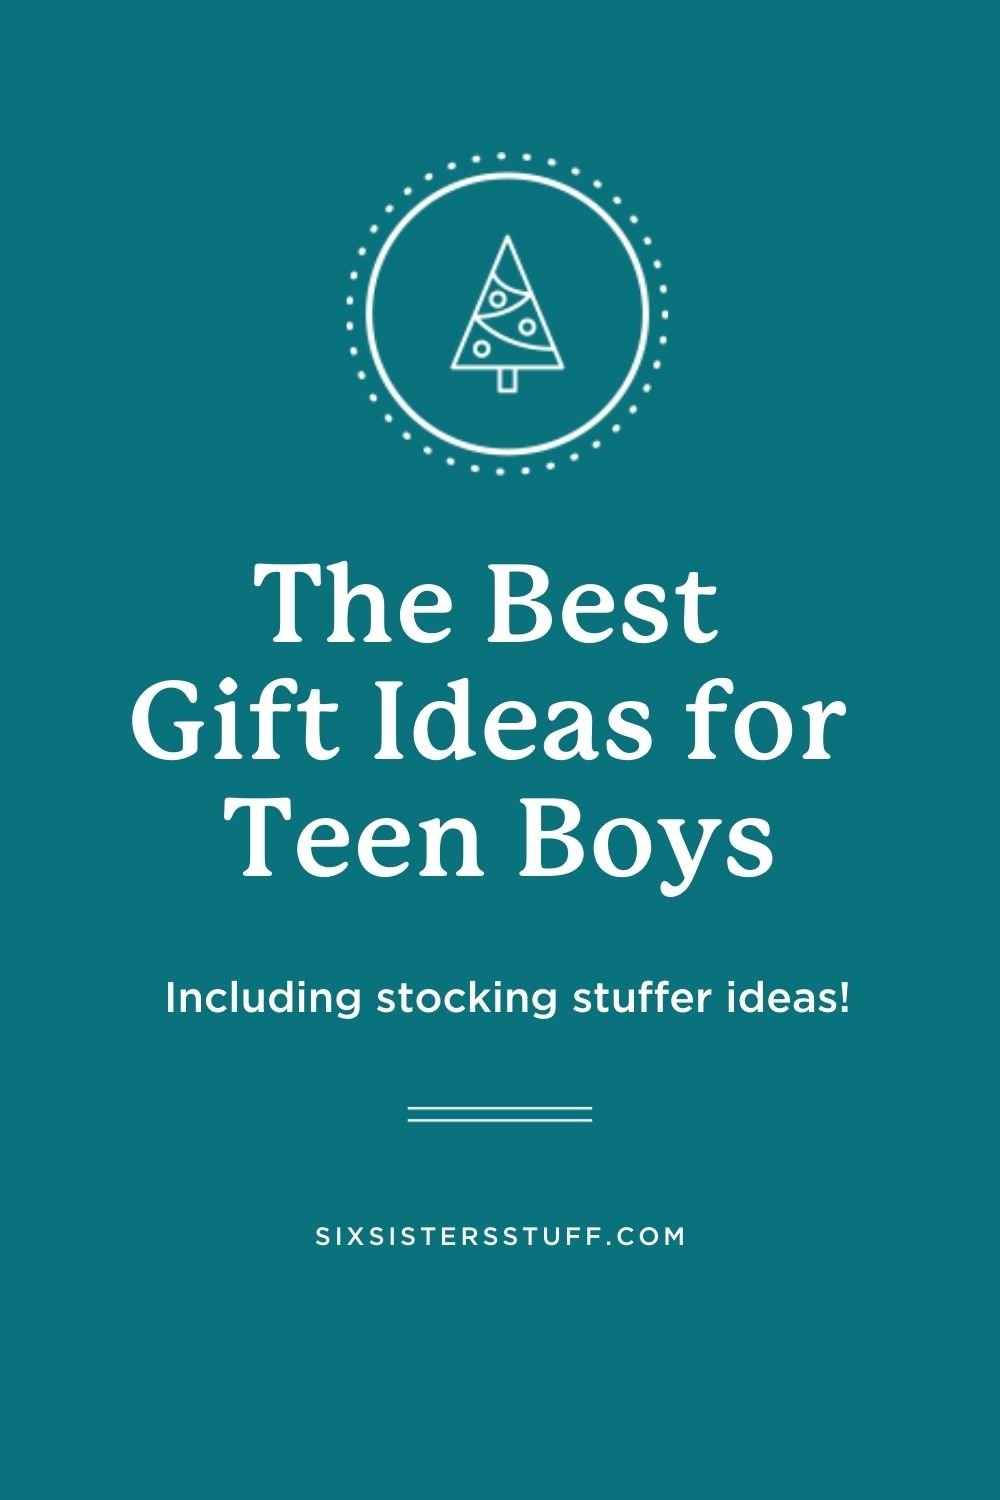 The Best Gift Ideas for Teen Boys (Including Stocking Stuffers)